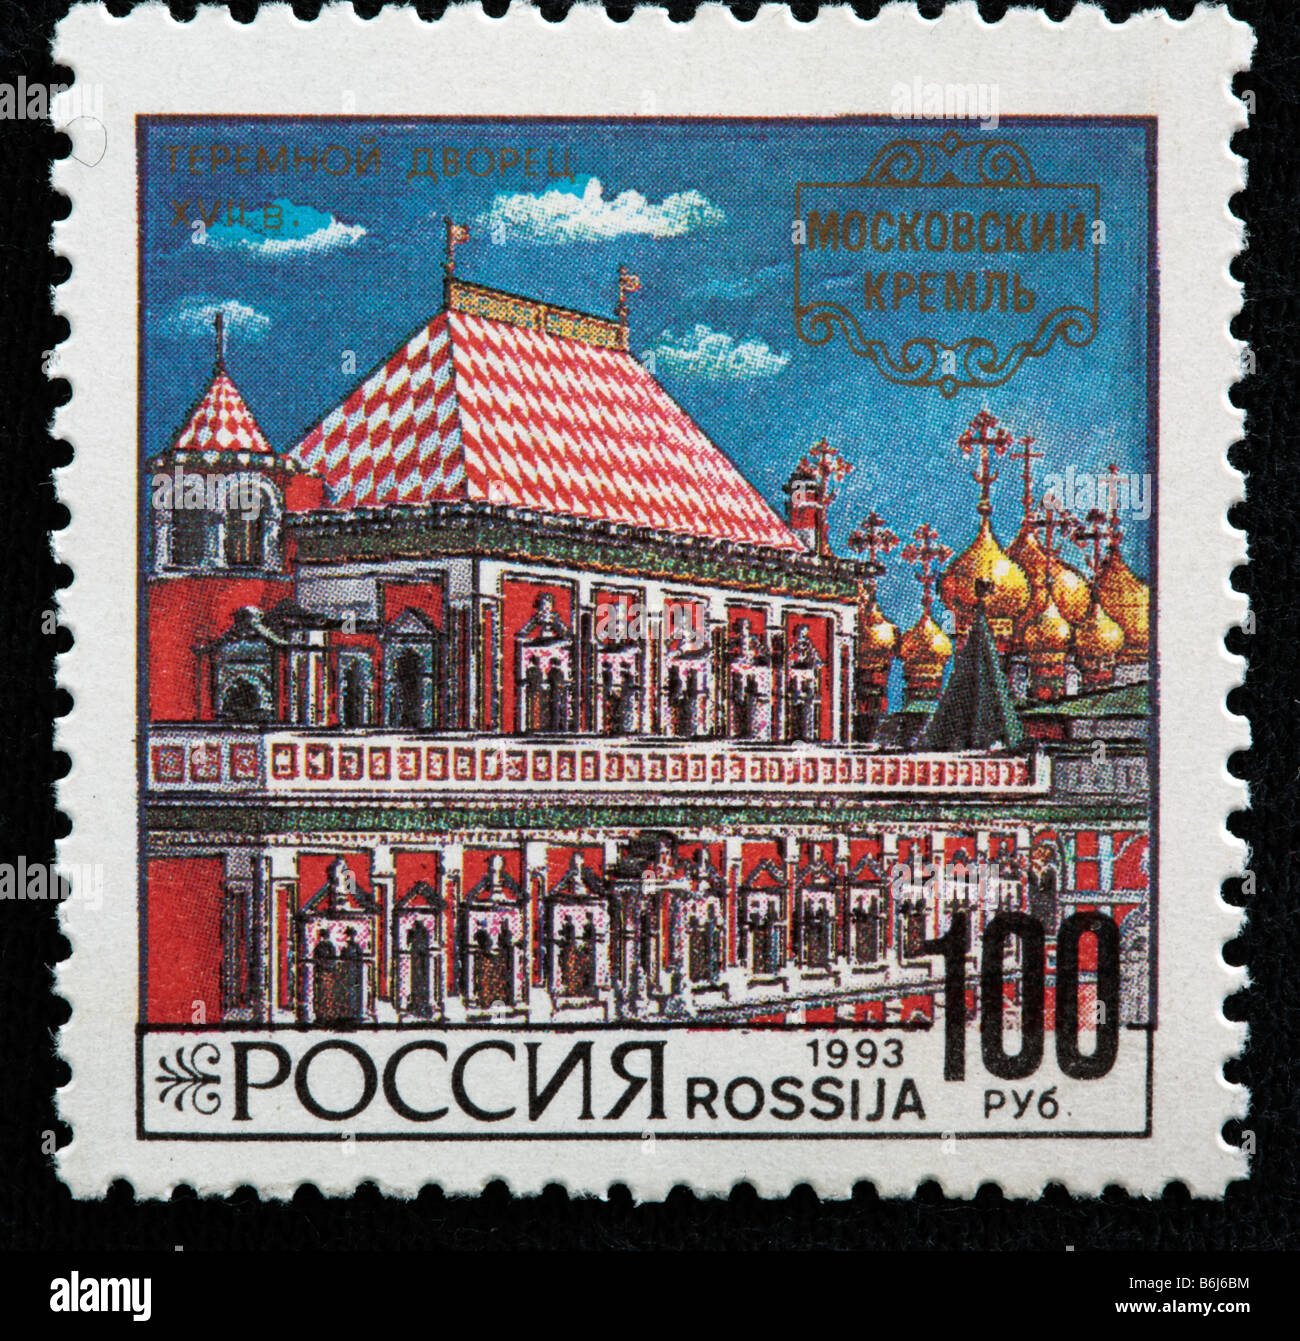 Terem palace (17th century), Moscow Kremlin, postage stamp, Russia, 1993 Stock Photo